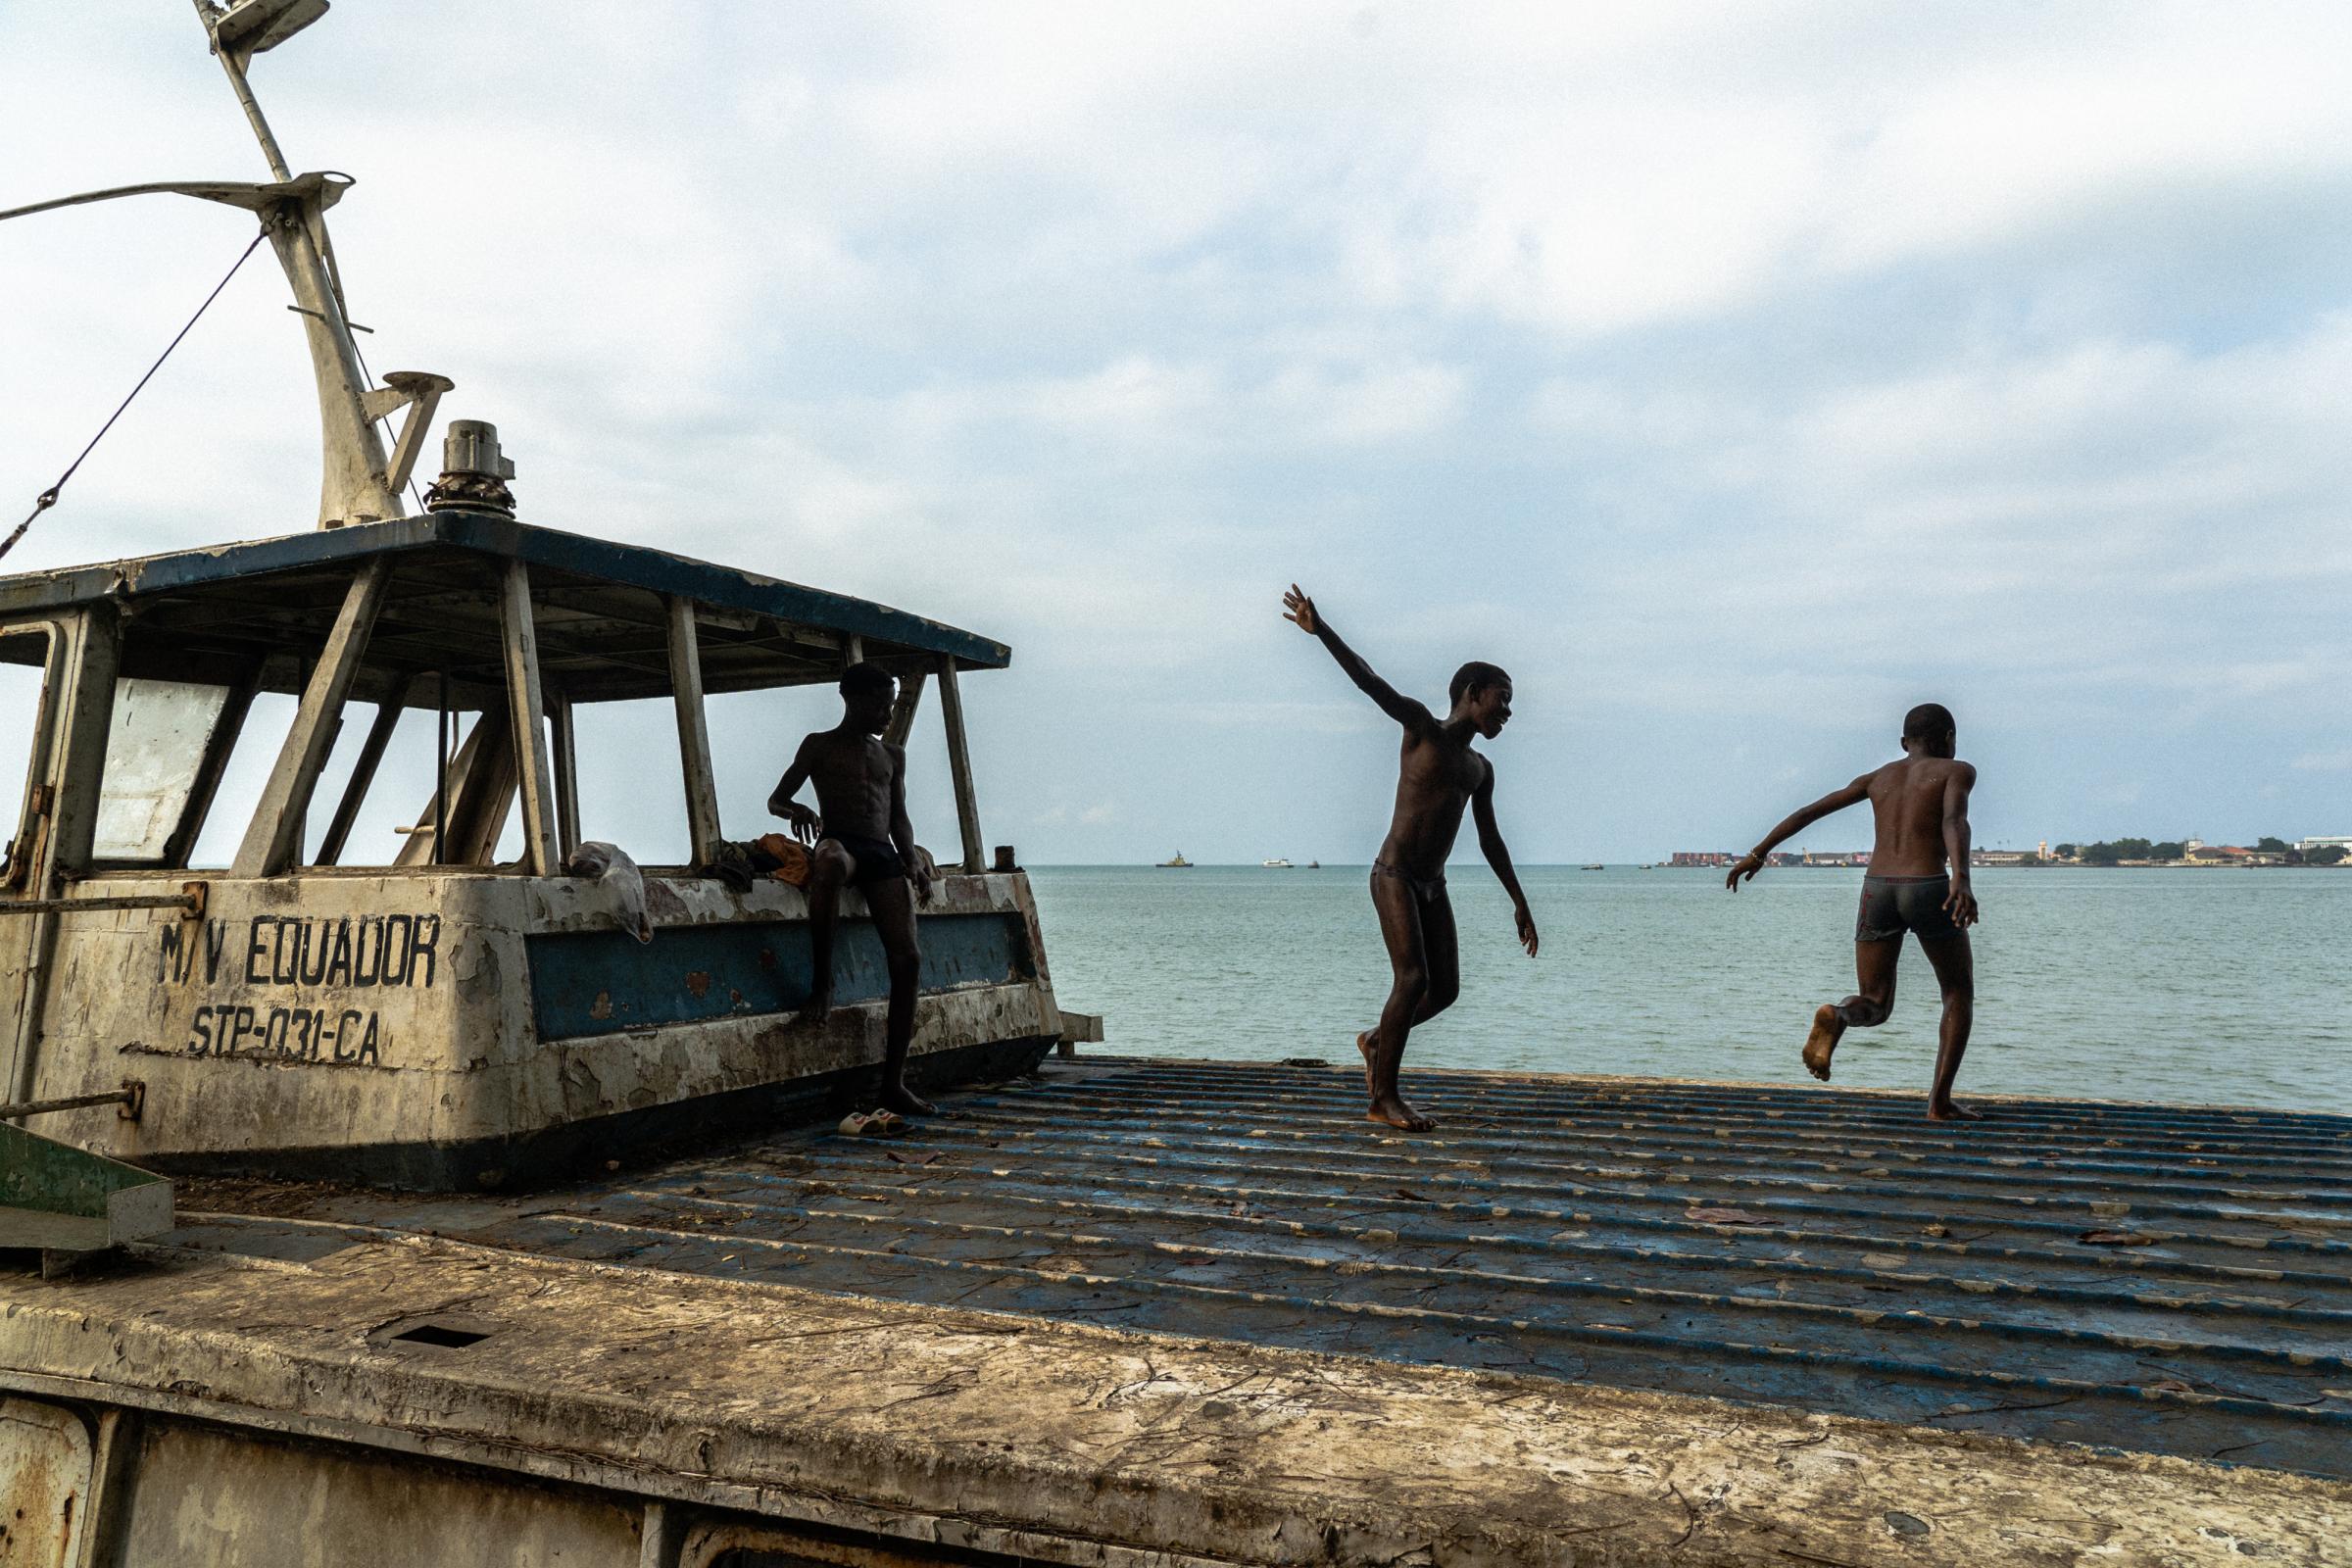 Genetic Engineering In the Mosquito War - Kids play on the abandoned rusty boat before jumping into...